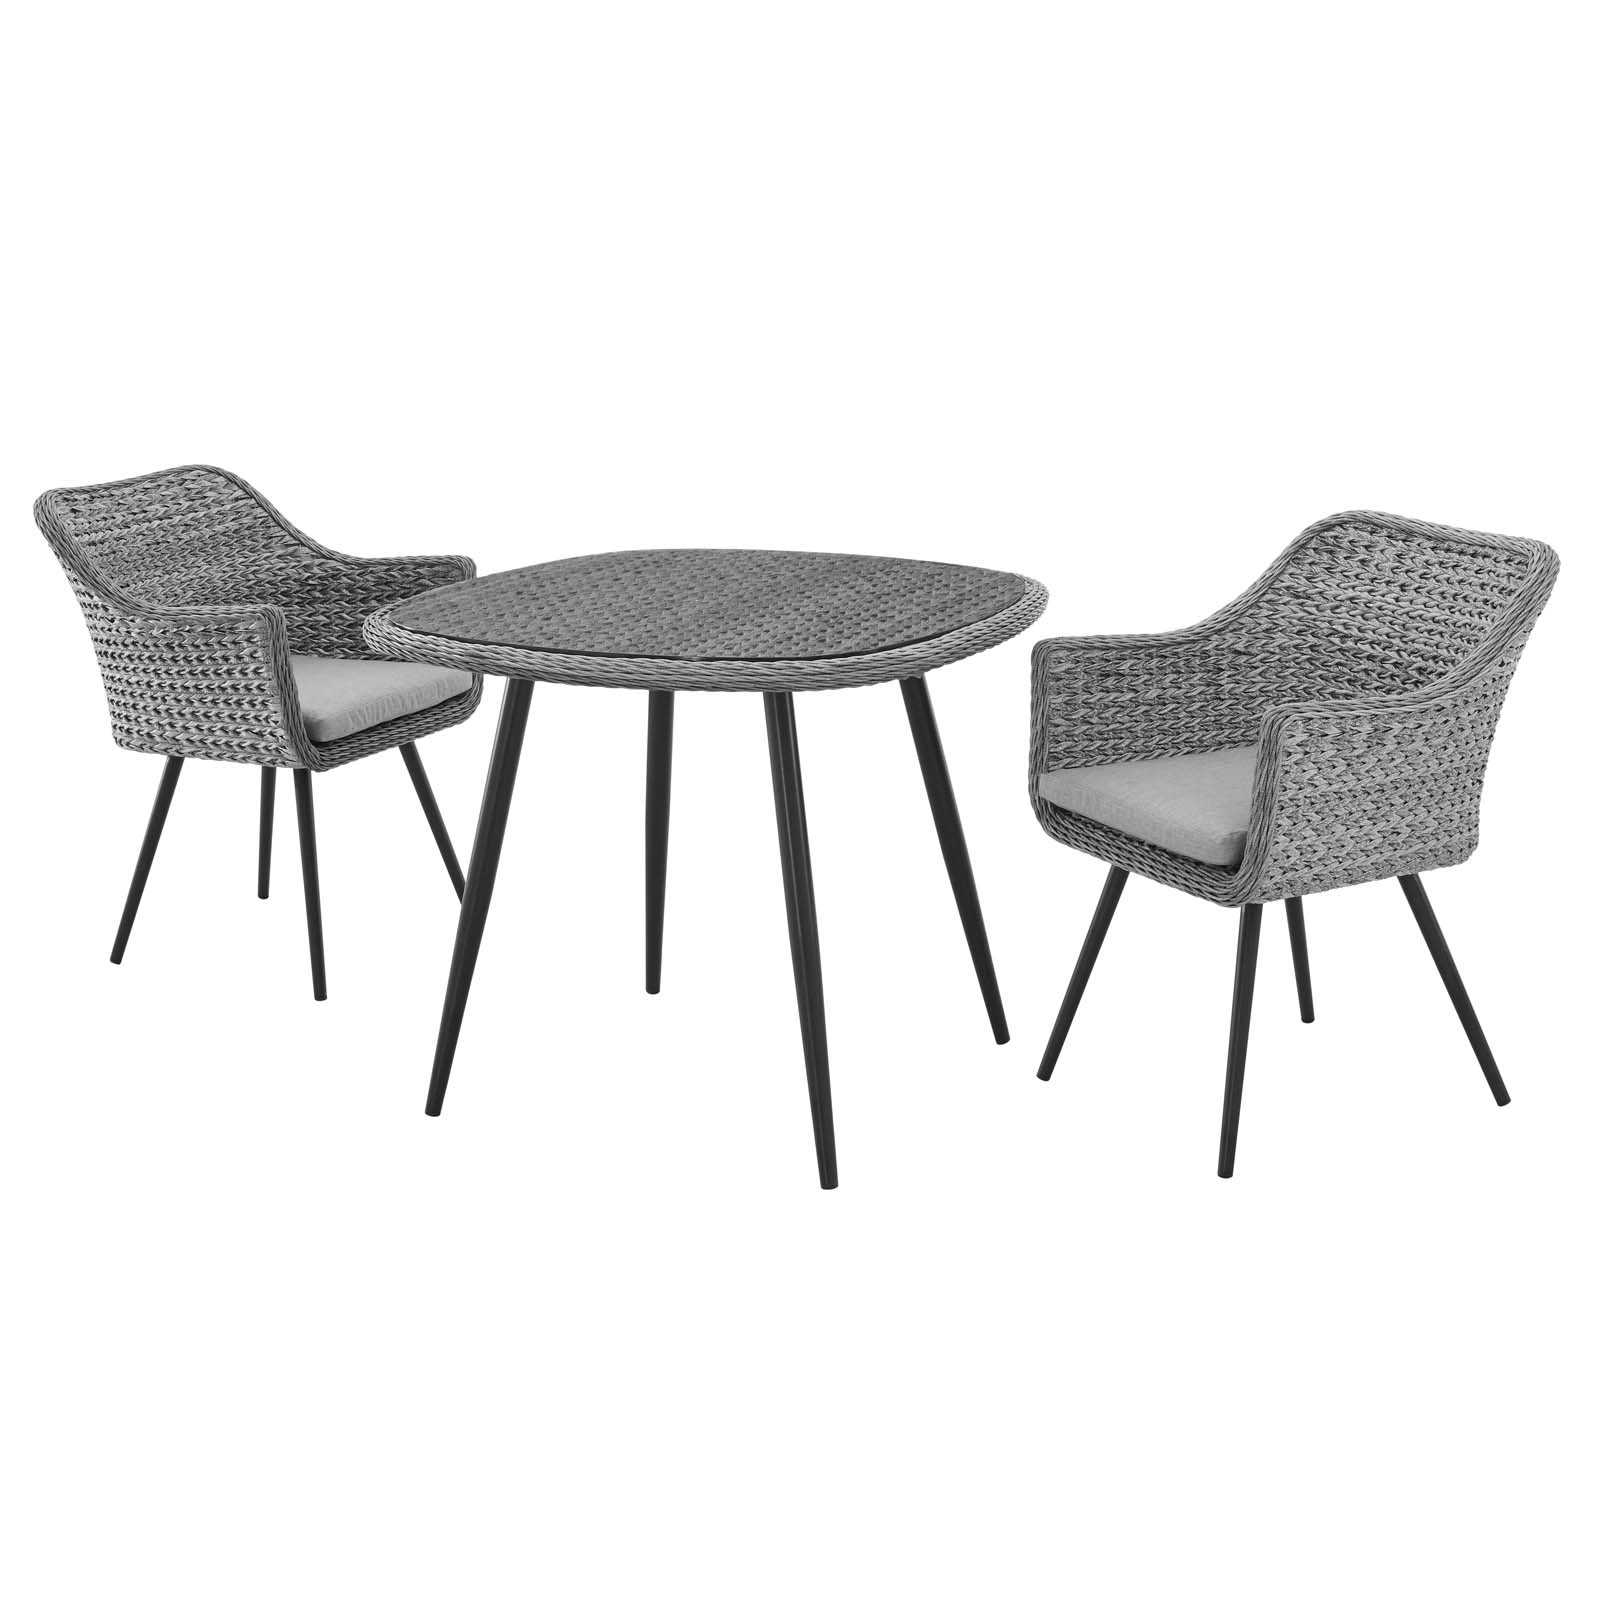 Contemporary Modern Urban Designer Outdoor Patio Balcony Garden Furniture Side Dining Chair and Table Set, Fabric Rattan Wicker Aluminum, Grey Gray - image 1 of 8